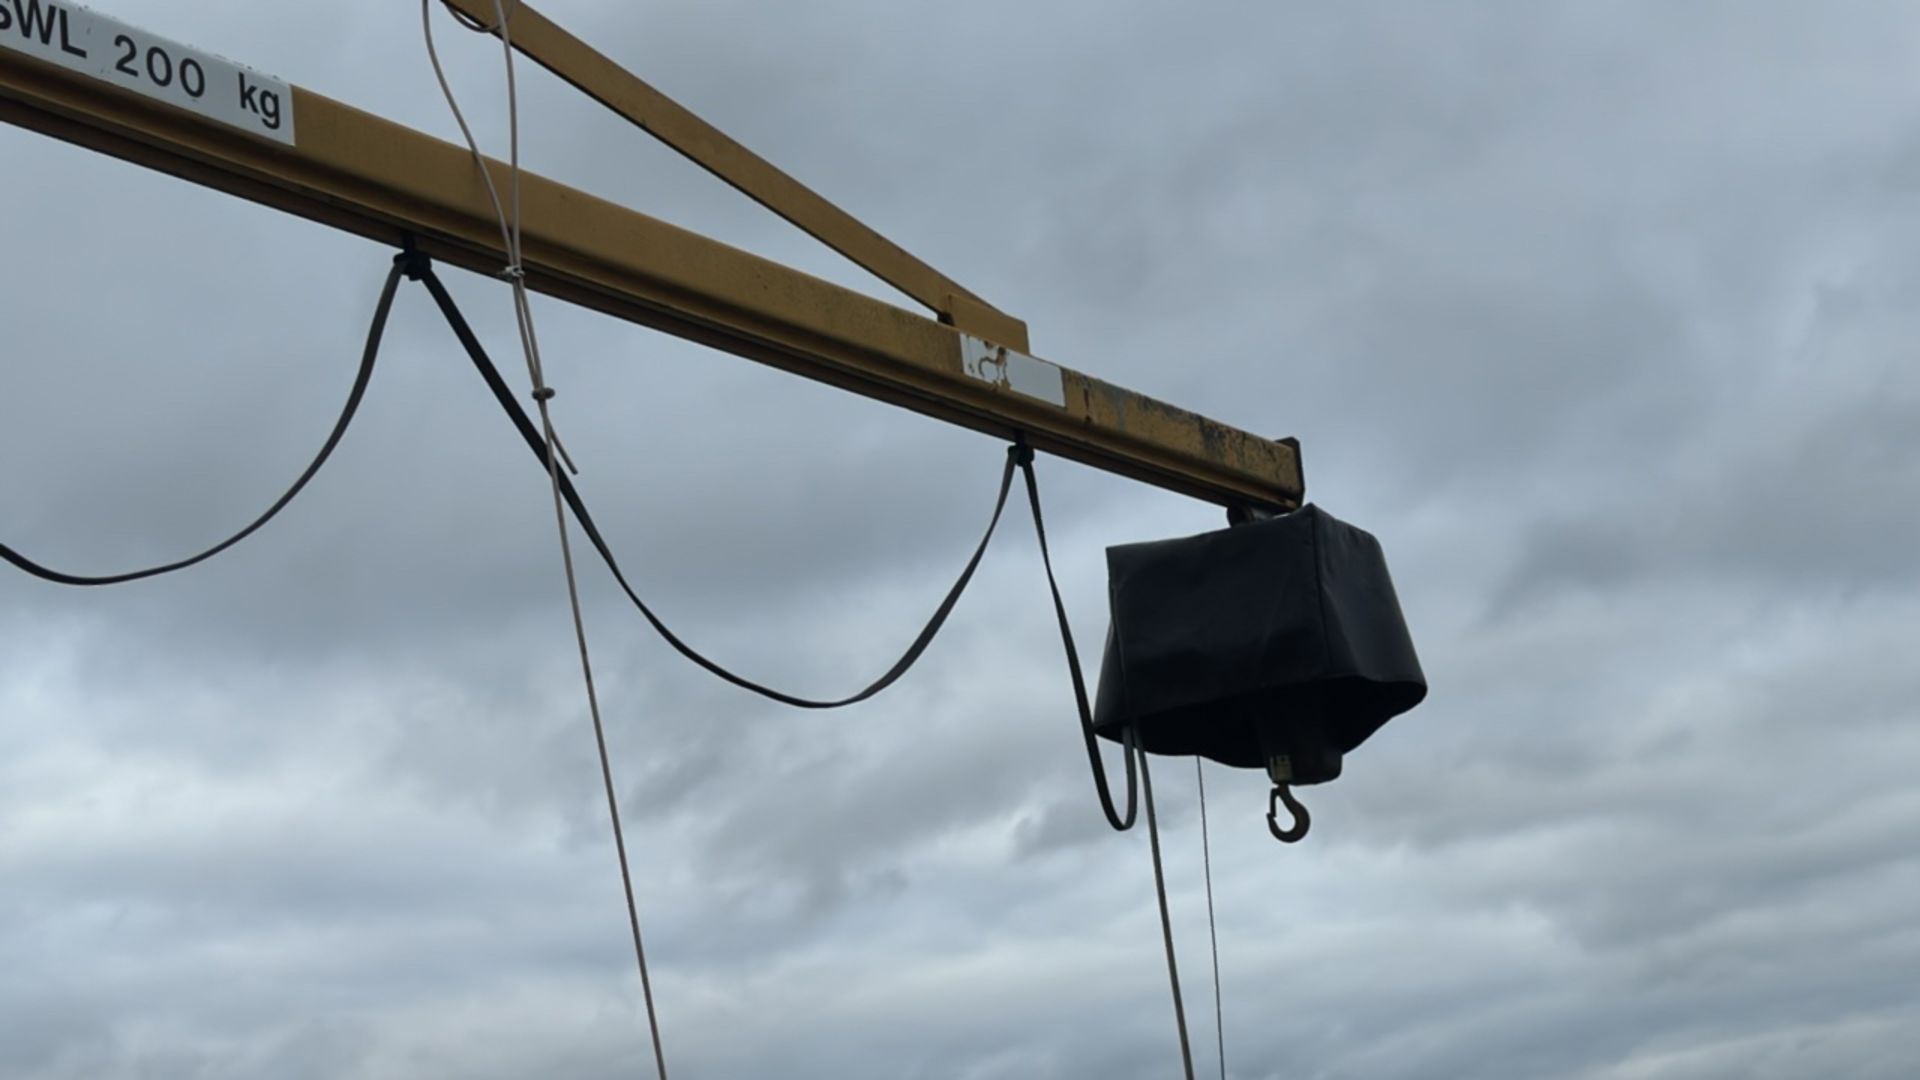 Roof Crane - Jib Crane Fitted with Electric Chain Hoist - Image 4 of 7